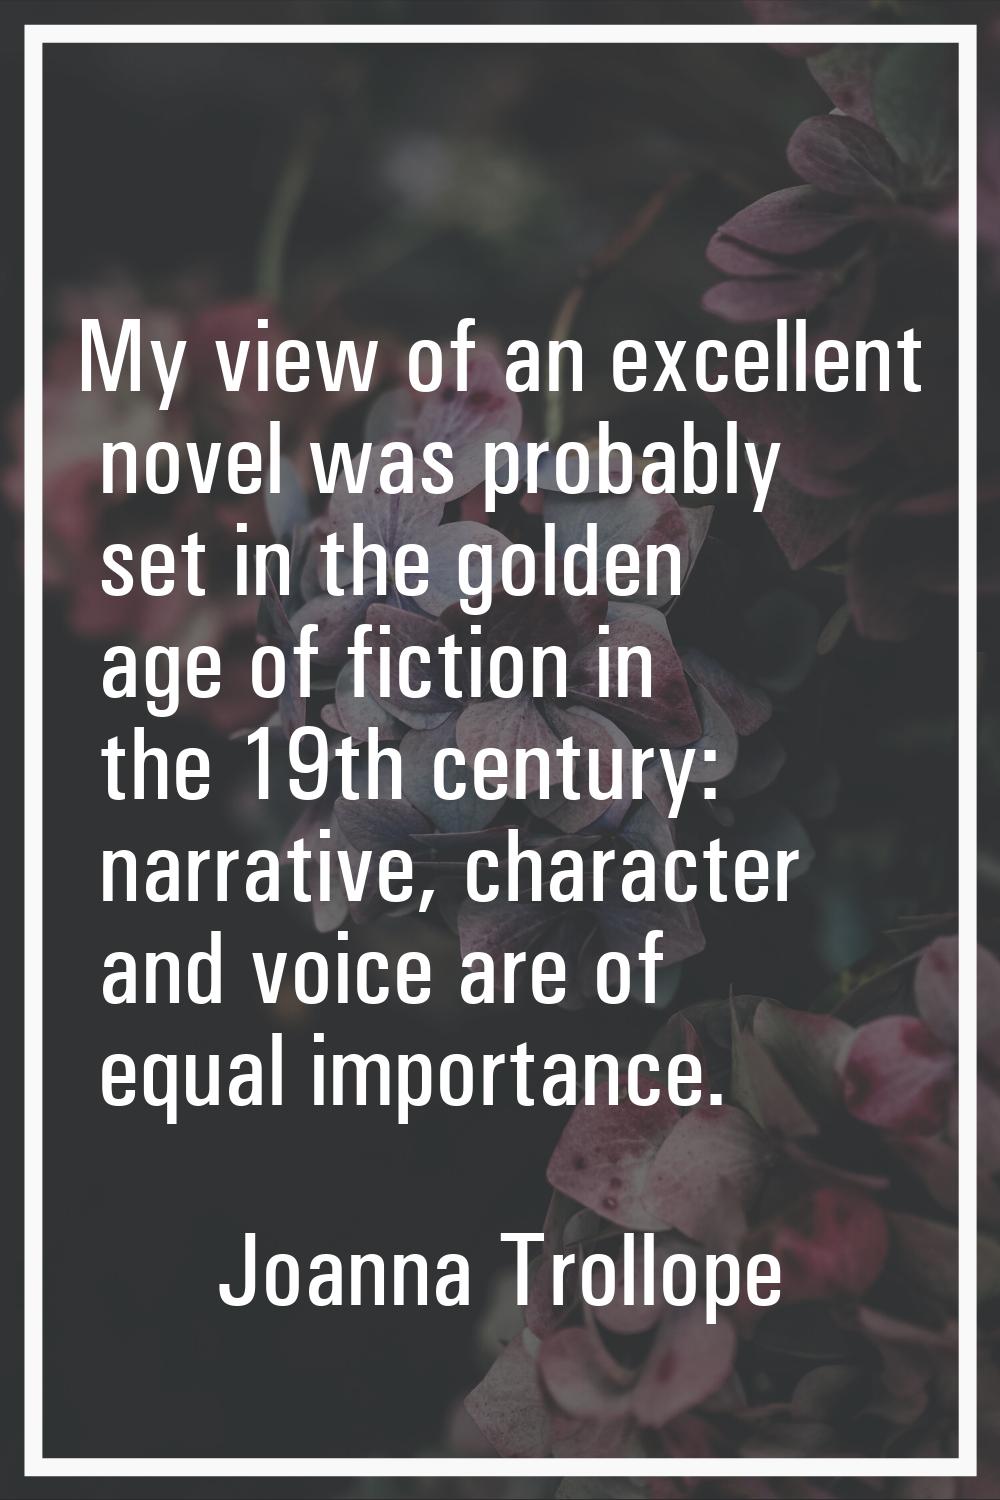 My view of an excellent novel was probably set in the golden age of fiction in the 19th century: na